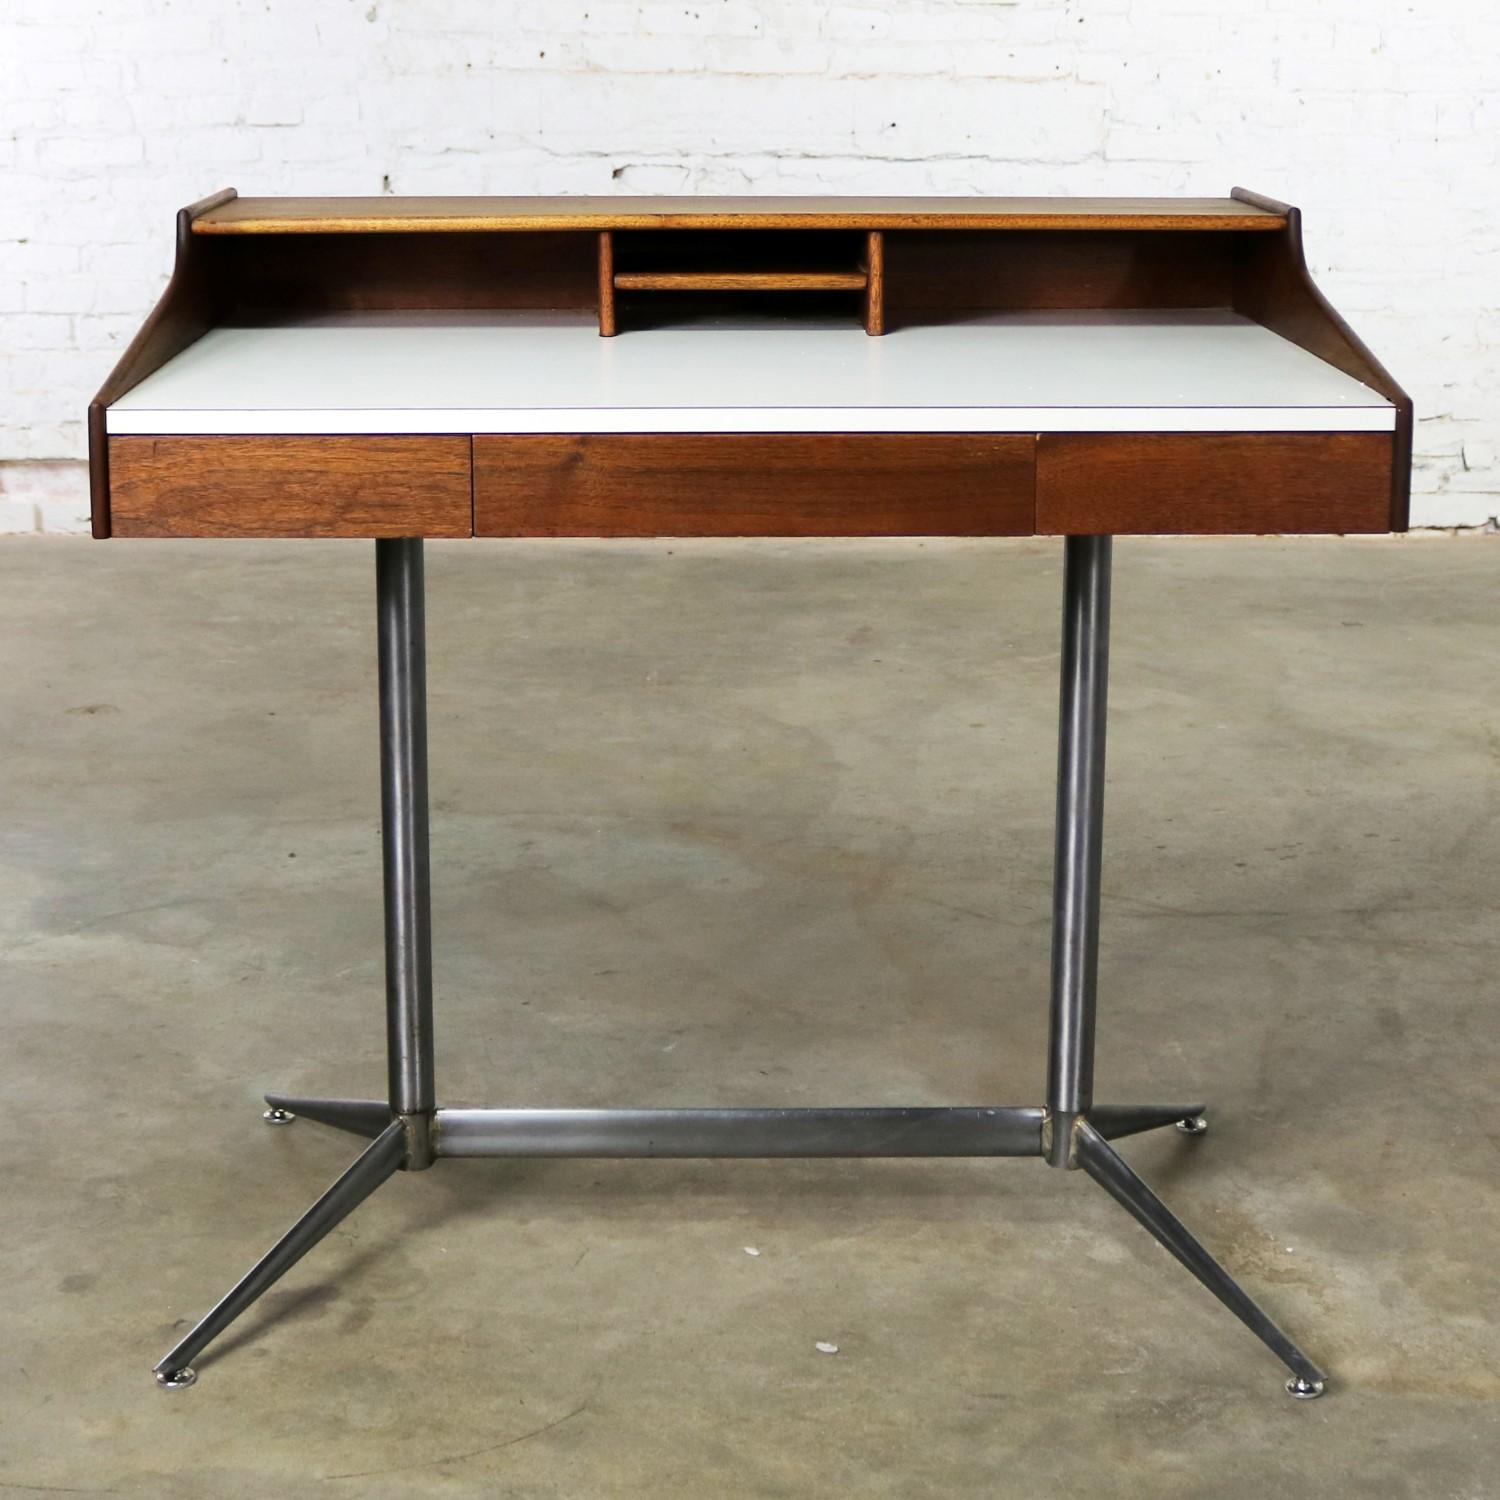 Handsome small scale Mid-Century Modern writing desk done in the style of the George Nelson swag leg desk by Herman Miller. This desk is in fabulous vintage condition. The walnut is beautiful, the white laminate top is without chips, and the steel